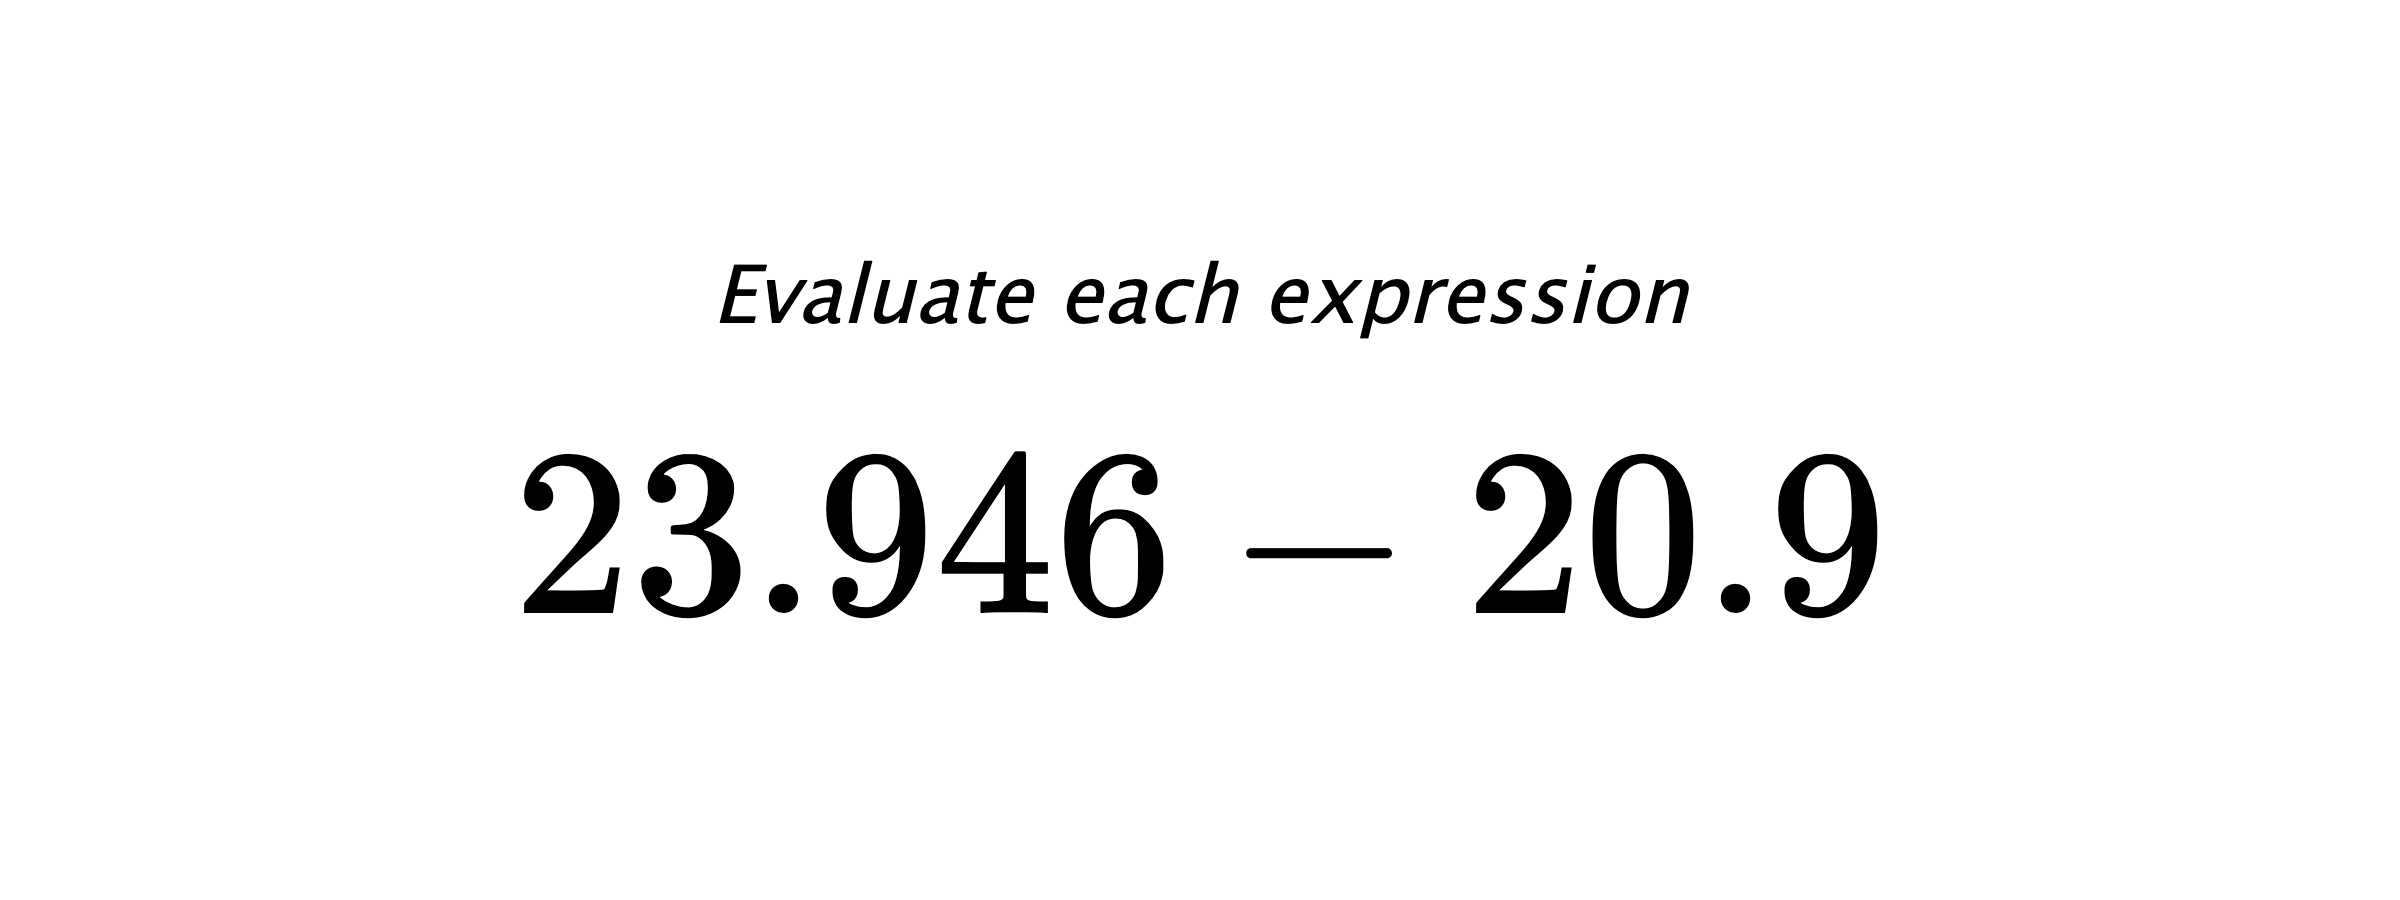 Evaluate each expression $ 23.946-20.9 $